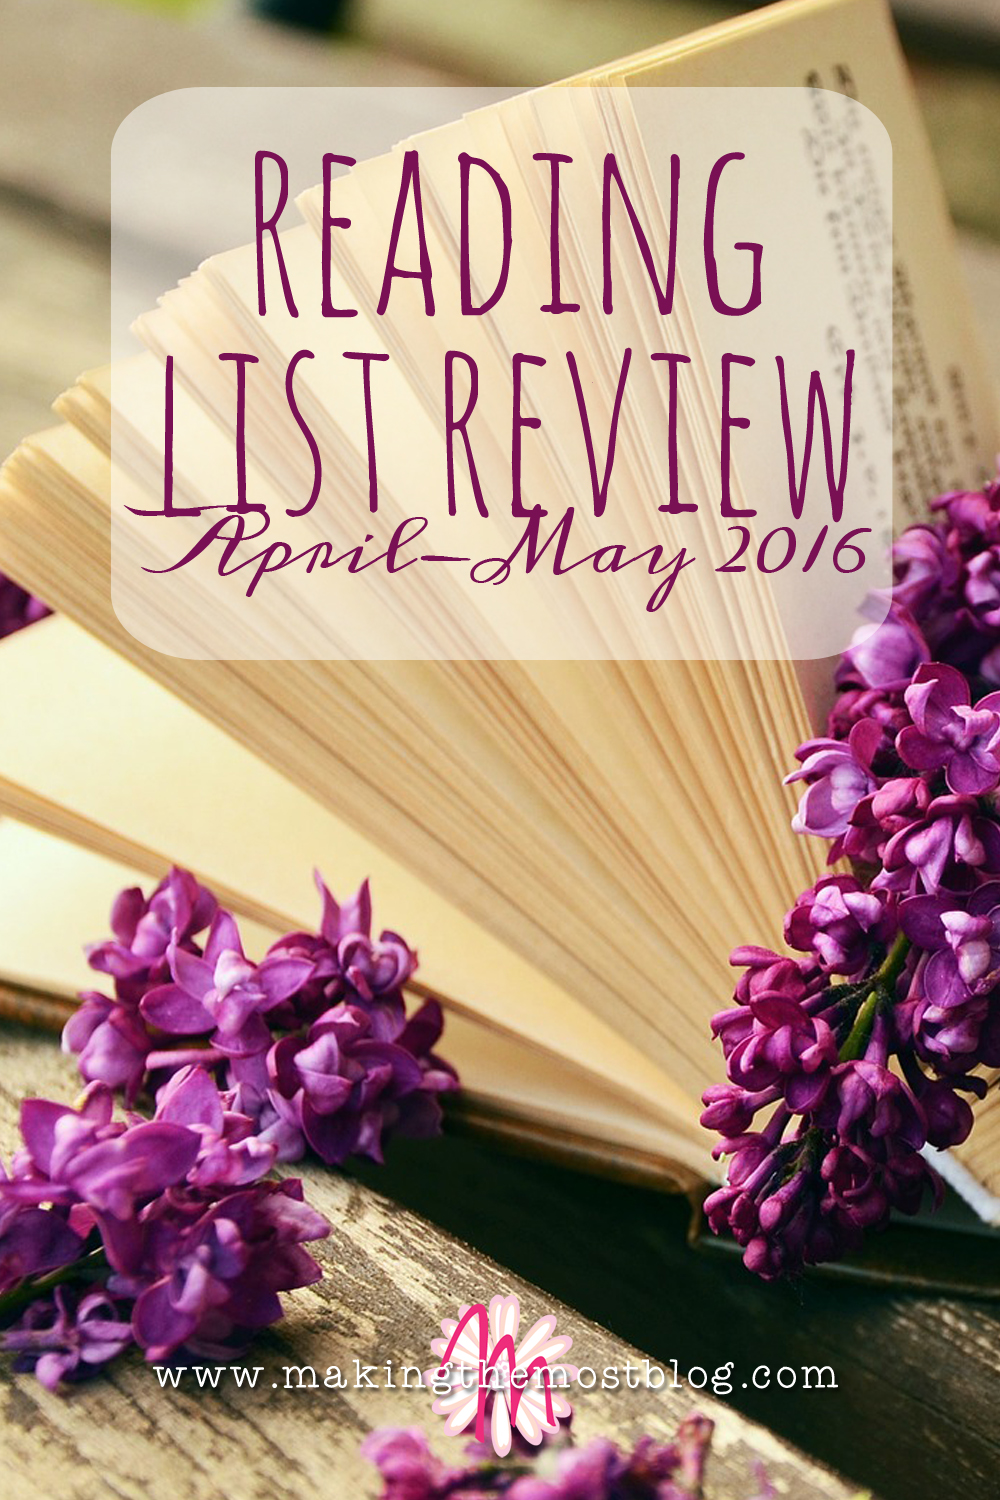 Reading List Review: April-May 2016 | Making the Most Blog